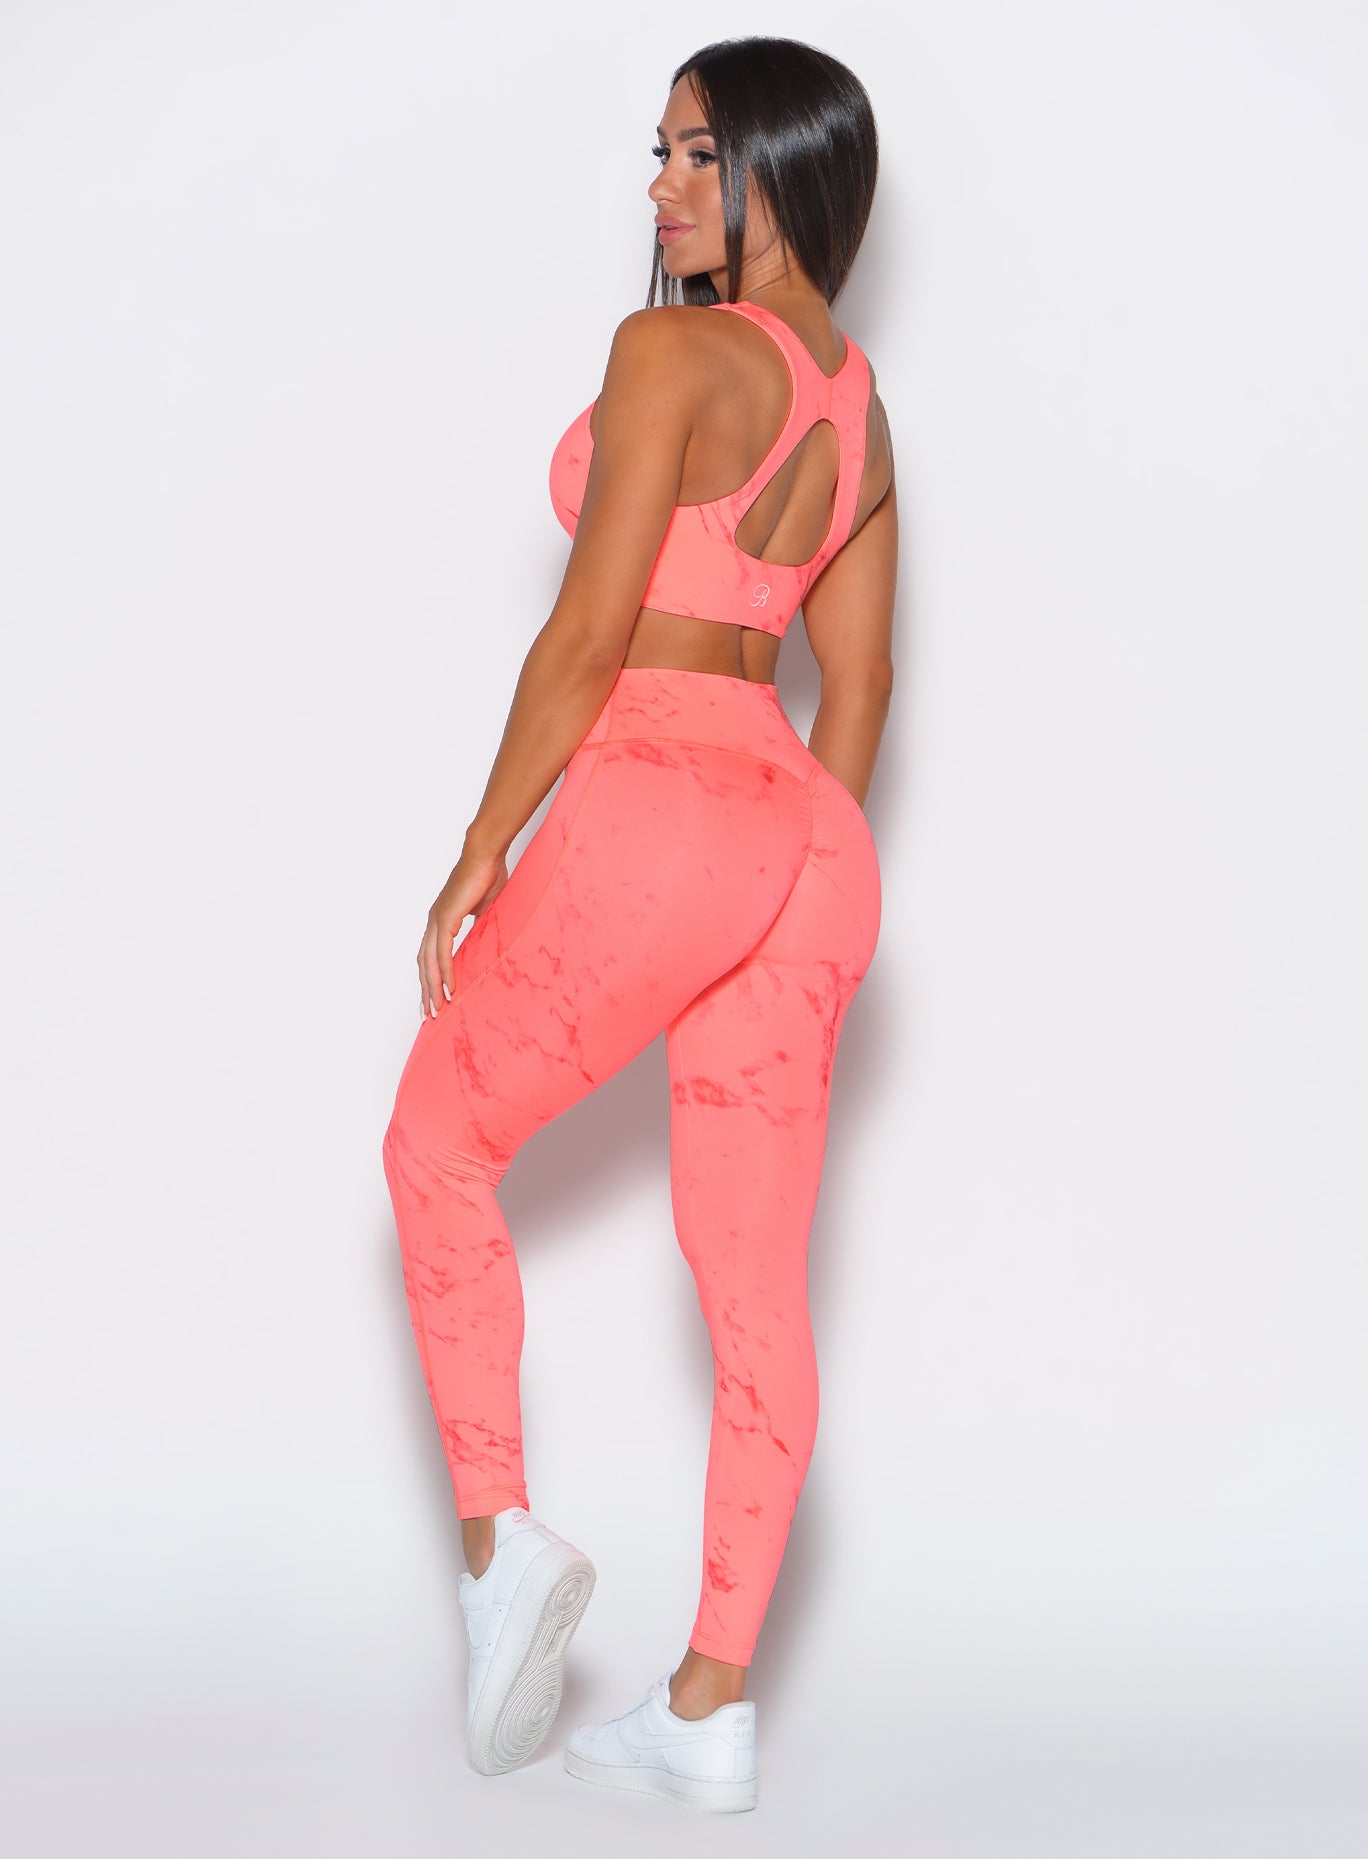 left side profile view of a model facing to her left wearing our fit marble leggings in Coral reef color along with a matching bra